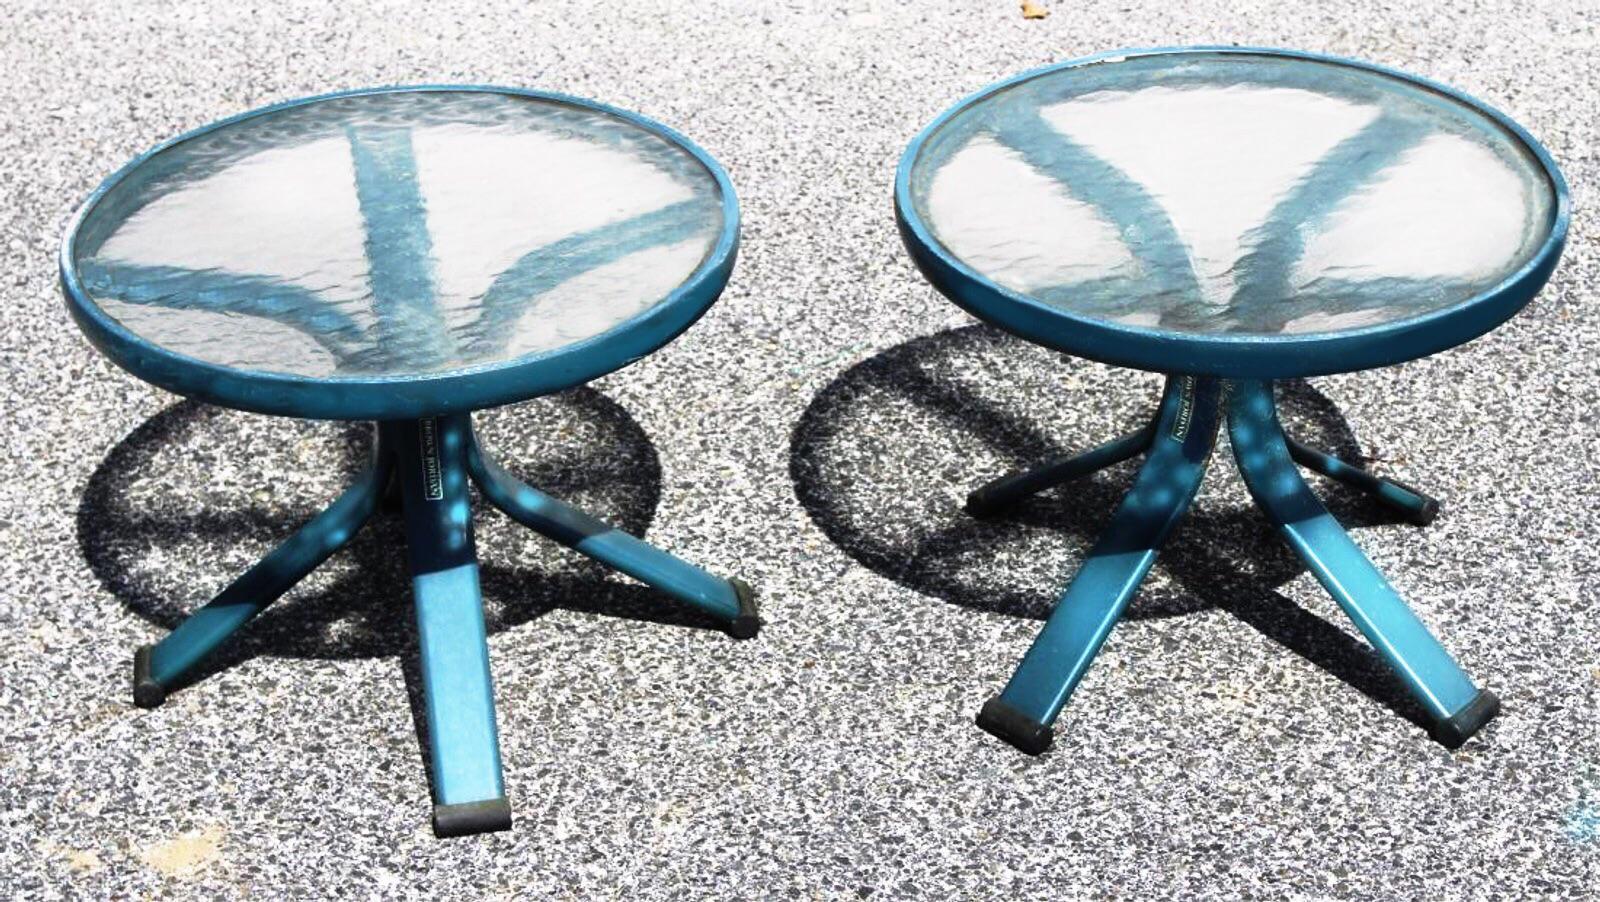 Award winning Richard Frinier designed this outdoor side table and cart set for Brown Jordan, circa 1980s. Cast aluminium and tempered glass. Primarily for outdoor use but certainly stylish enough for indoors.
